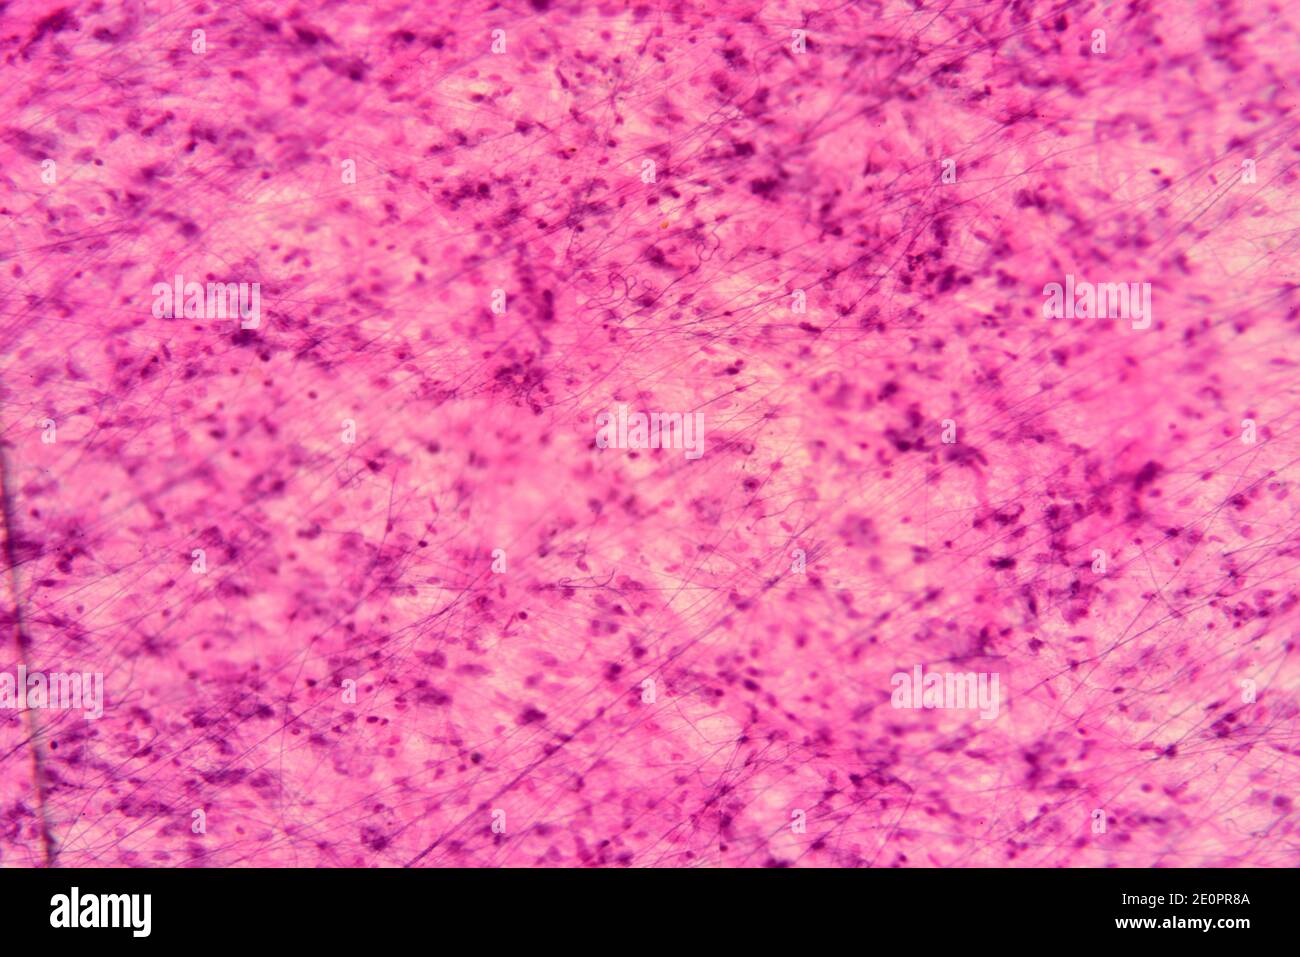 Human loose connective tissue with fibroblasts, collagen fibers and matrix. X75 at 10 cm wide. Stock Photo